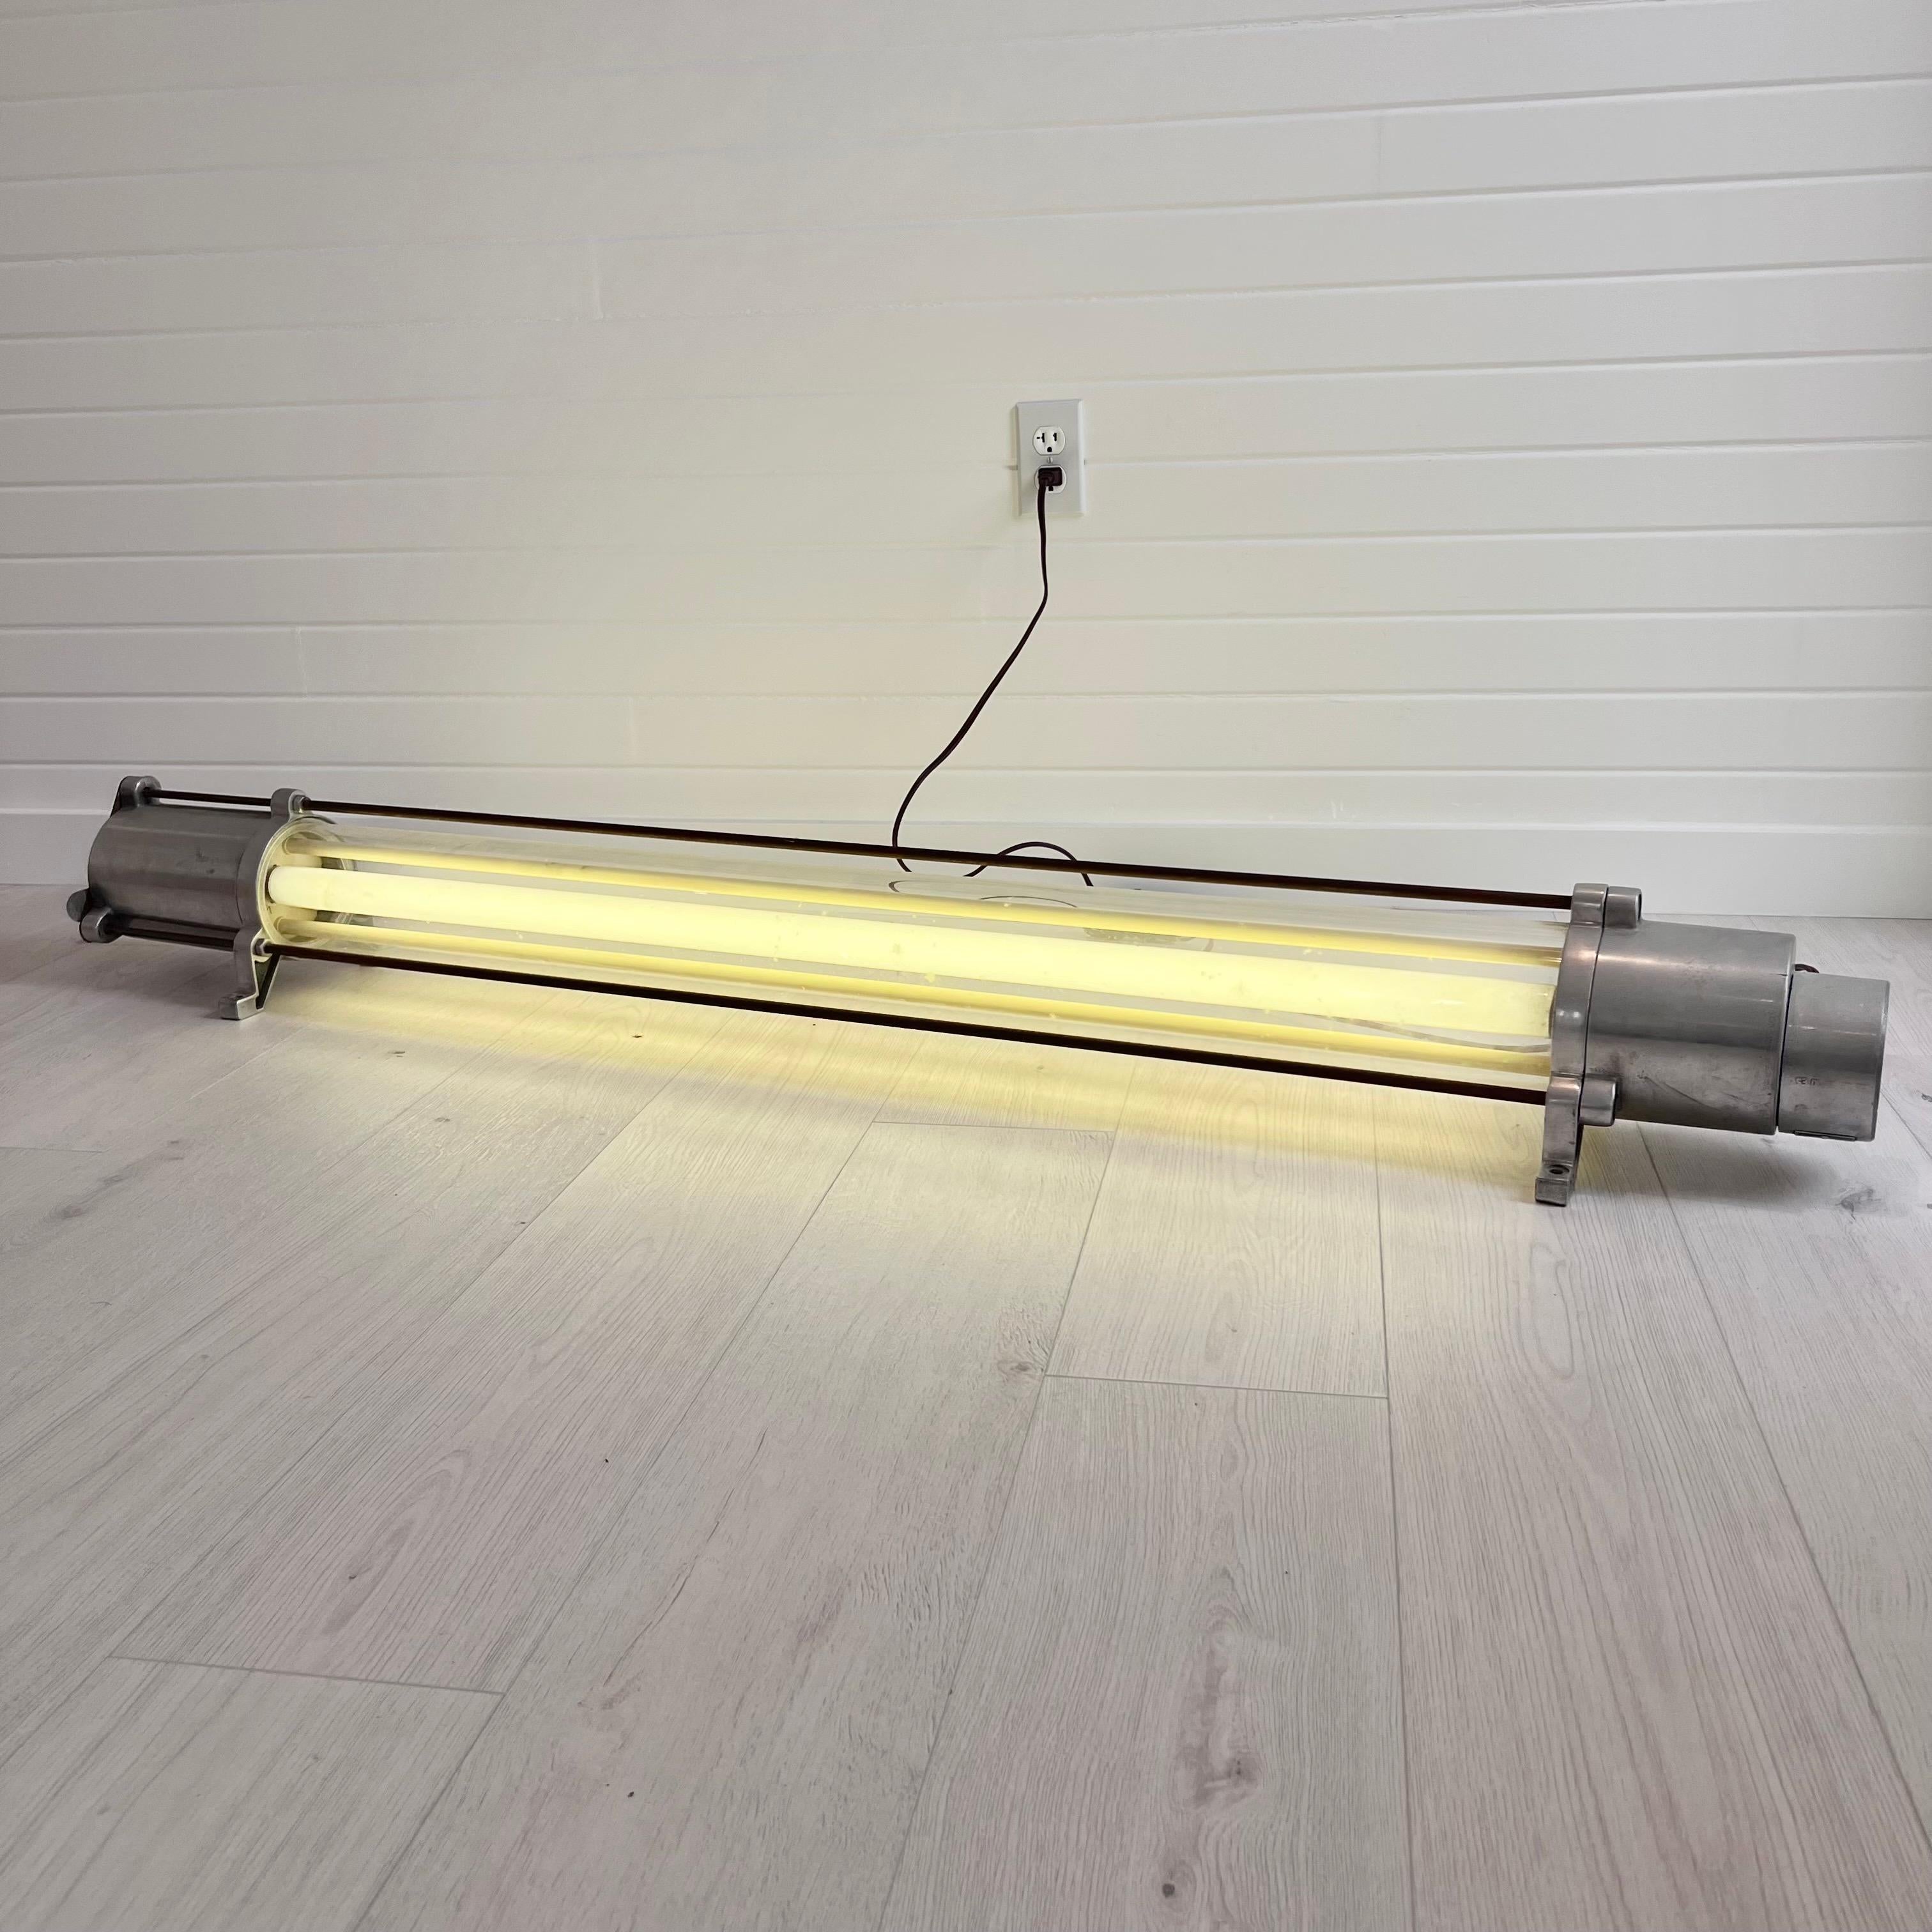 Incredible 1970s explosion proof mining lamp from Germany. To meet the criteria for the explosion proof rating, an enclosure must be able to contain any explosion originating within its housing and prevent sparks from within its housing from